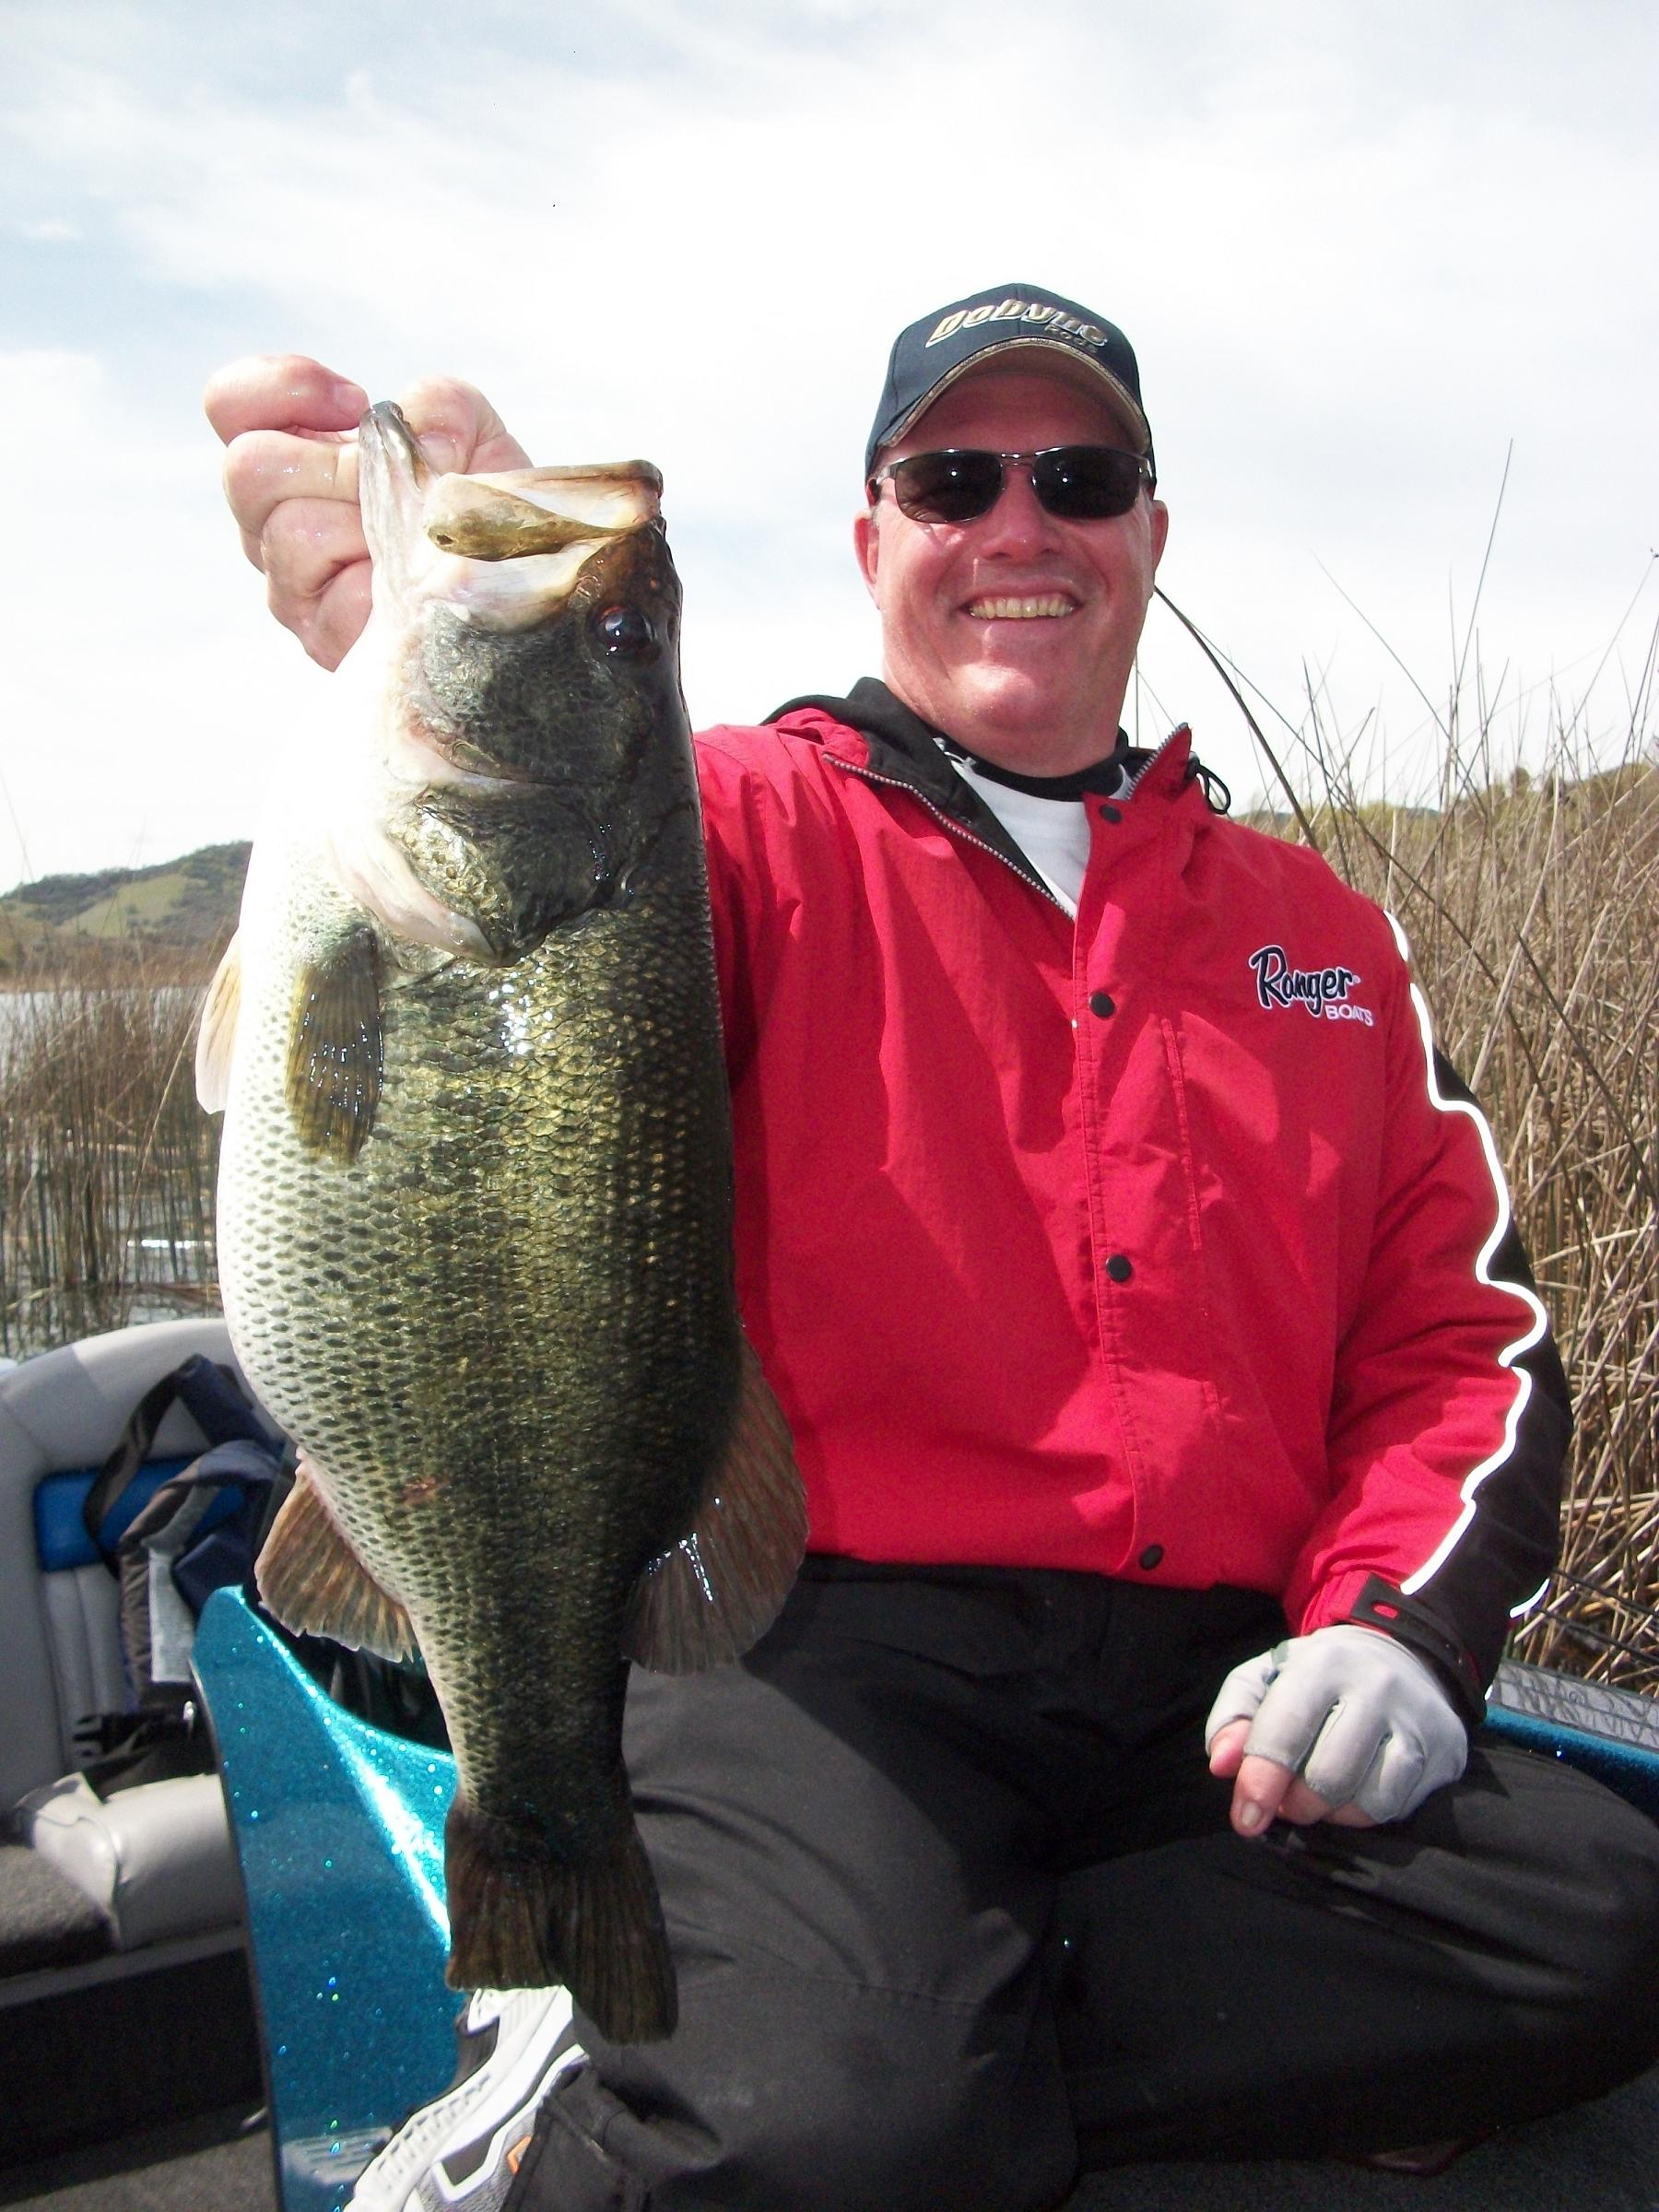 Rod, reel, lure and line you caught your PB bass on. - Page 2 - Fishing Rods,  Reels, Line, and Knots - Bass Fishing Forums